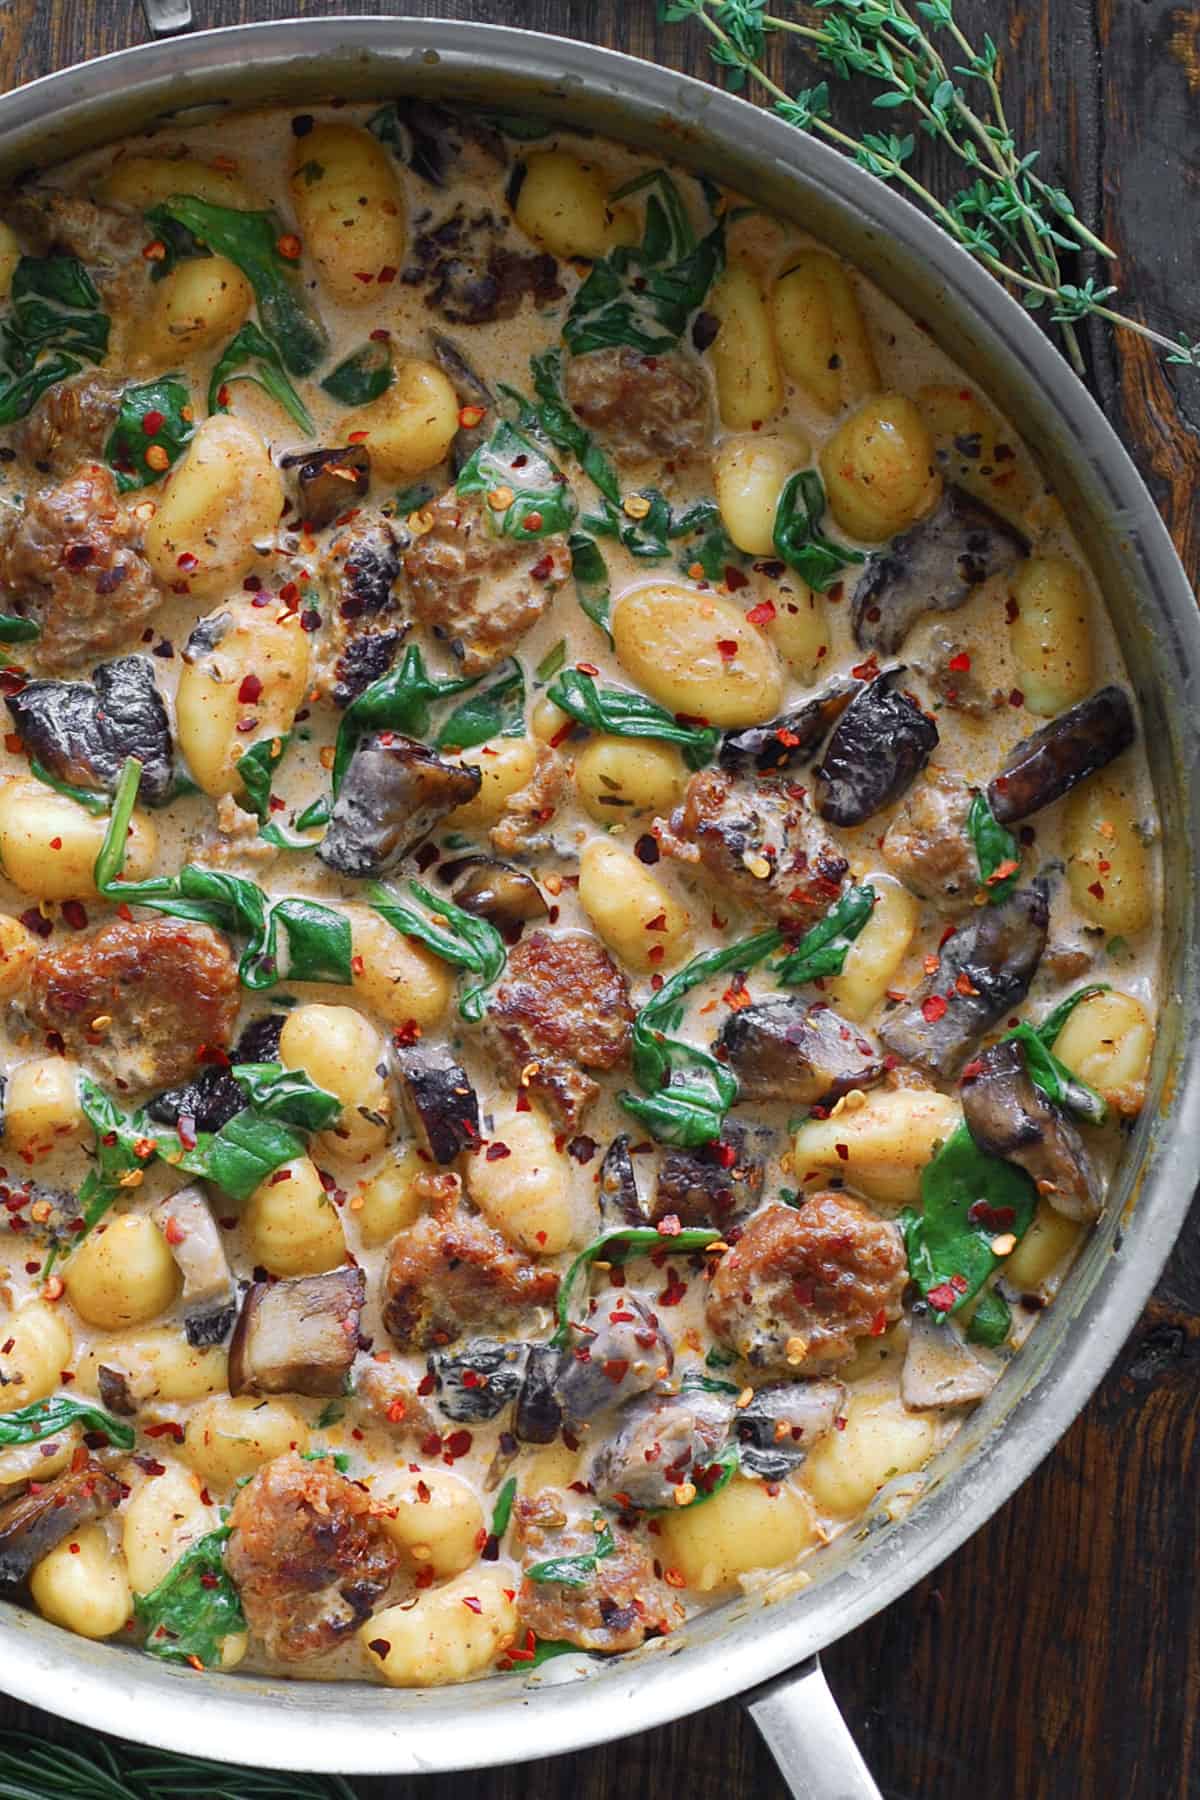 Creamy Gnocchi with Italian Sausage, Chopped Portobello Mushrooms, and Spinach - in a stainless steel pan.